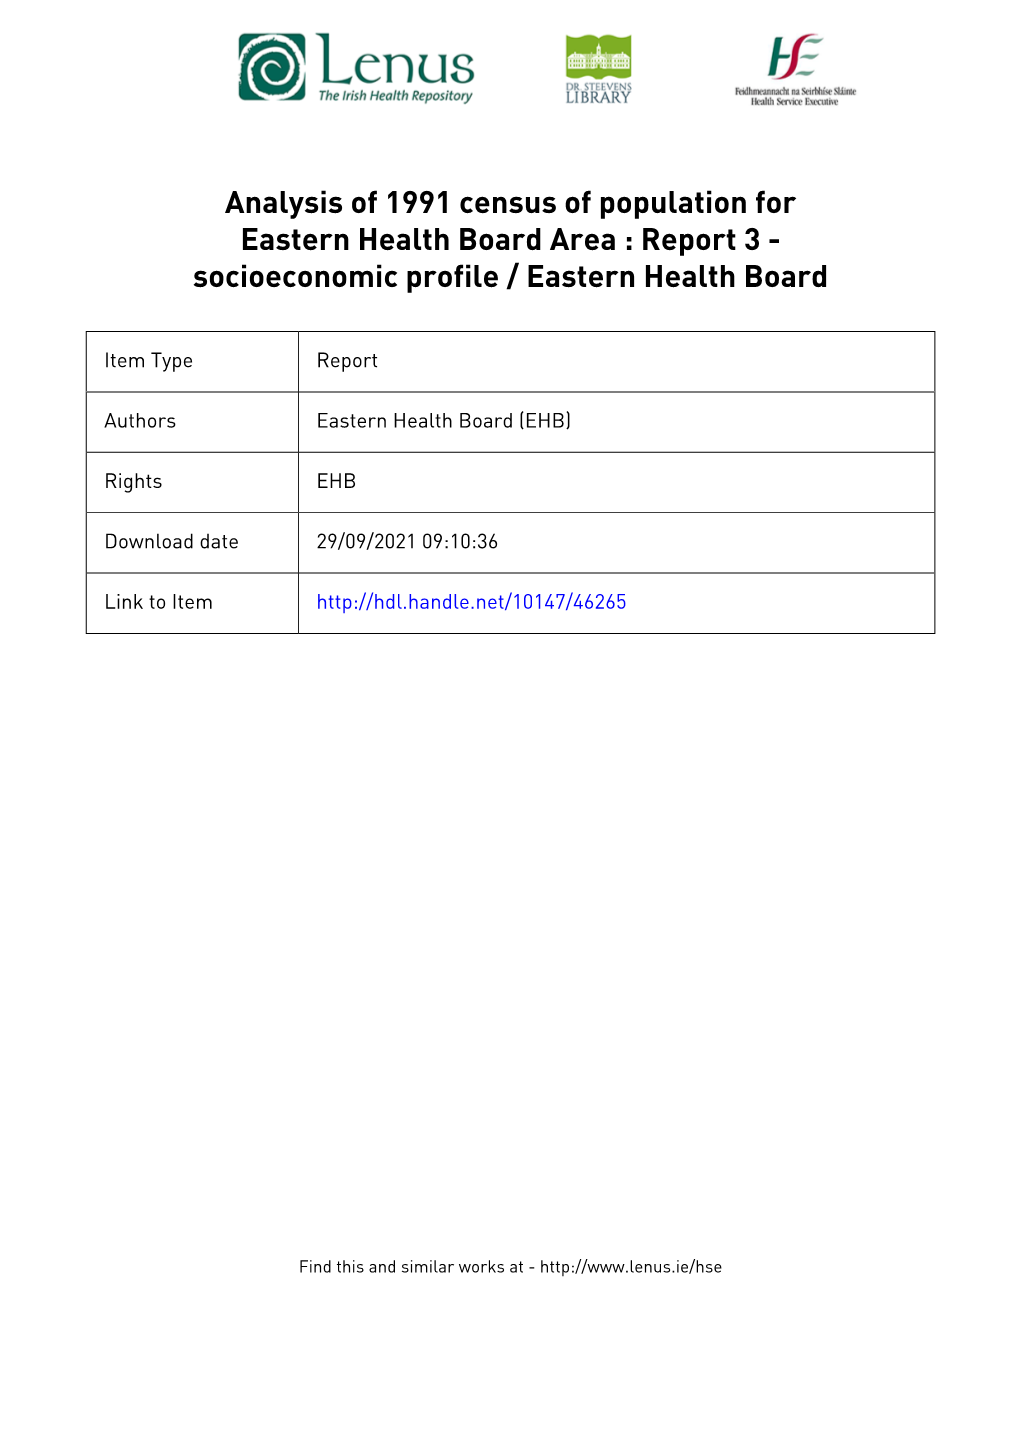 Analysis of 1991 Census of Population for Eastern Health Board Area : Report 3 - Socioeconomic Profile / Eastern Health Board